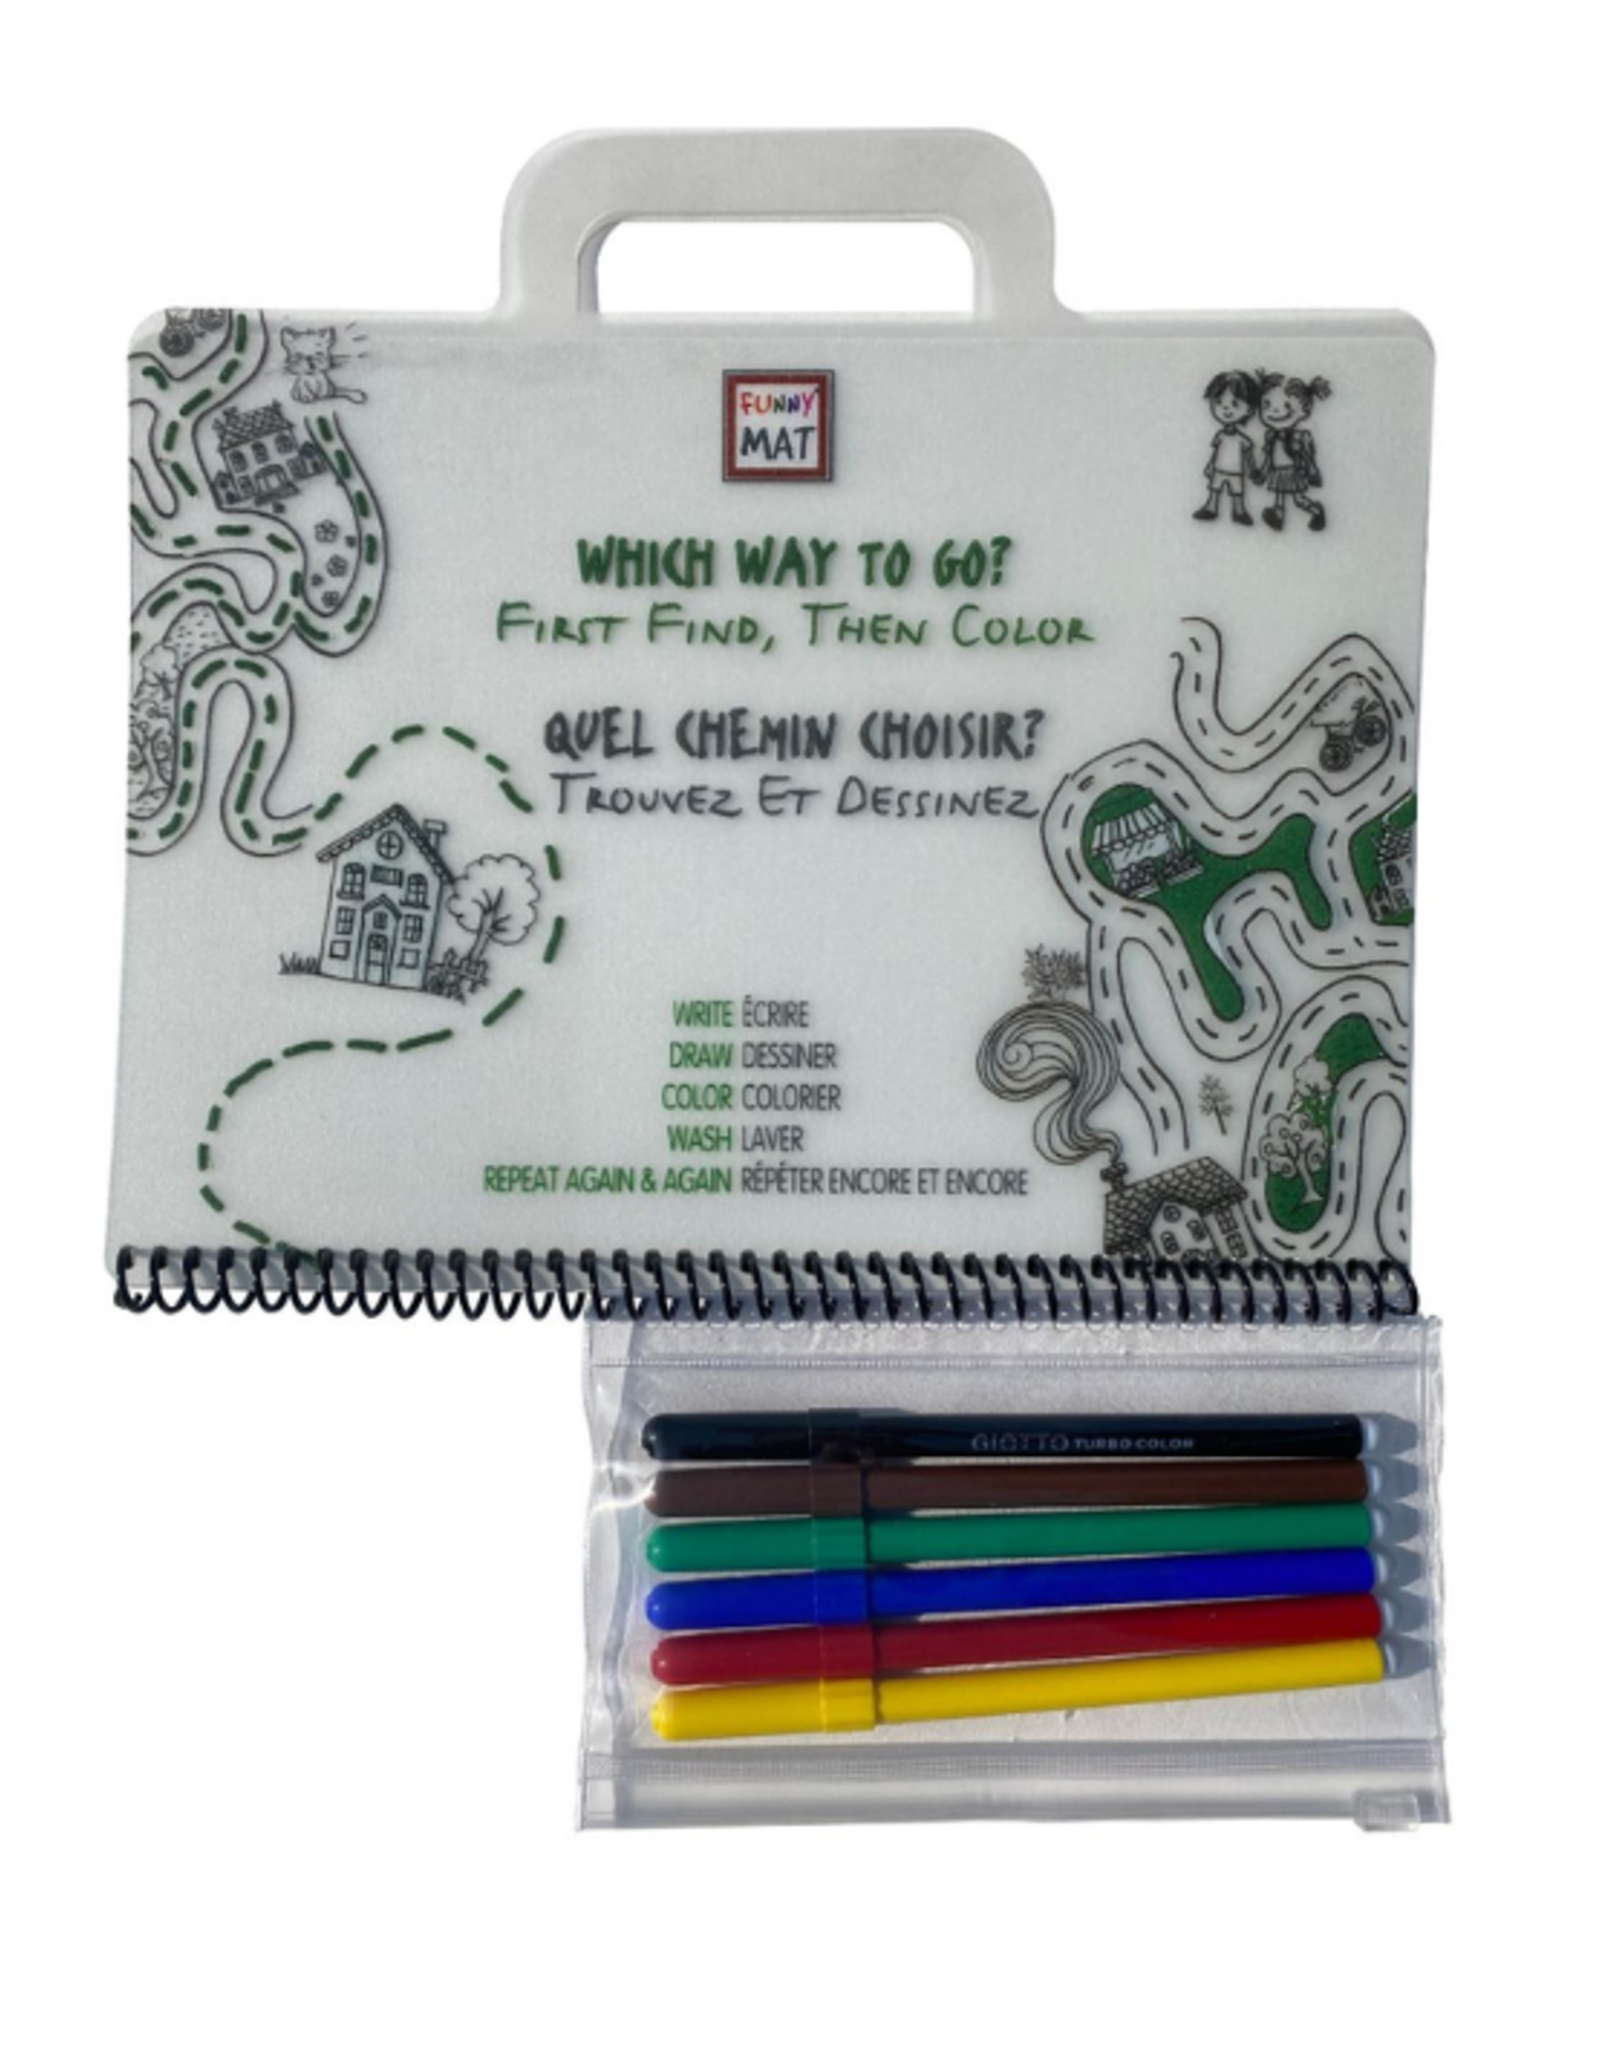 Funny Mat Funny Mat - Mini Travel Set with 6 Markers - Which Way to Go?